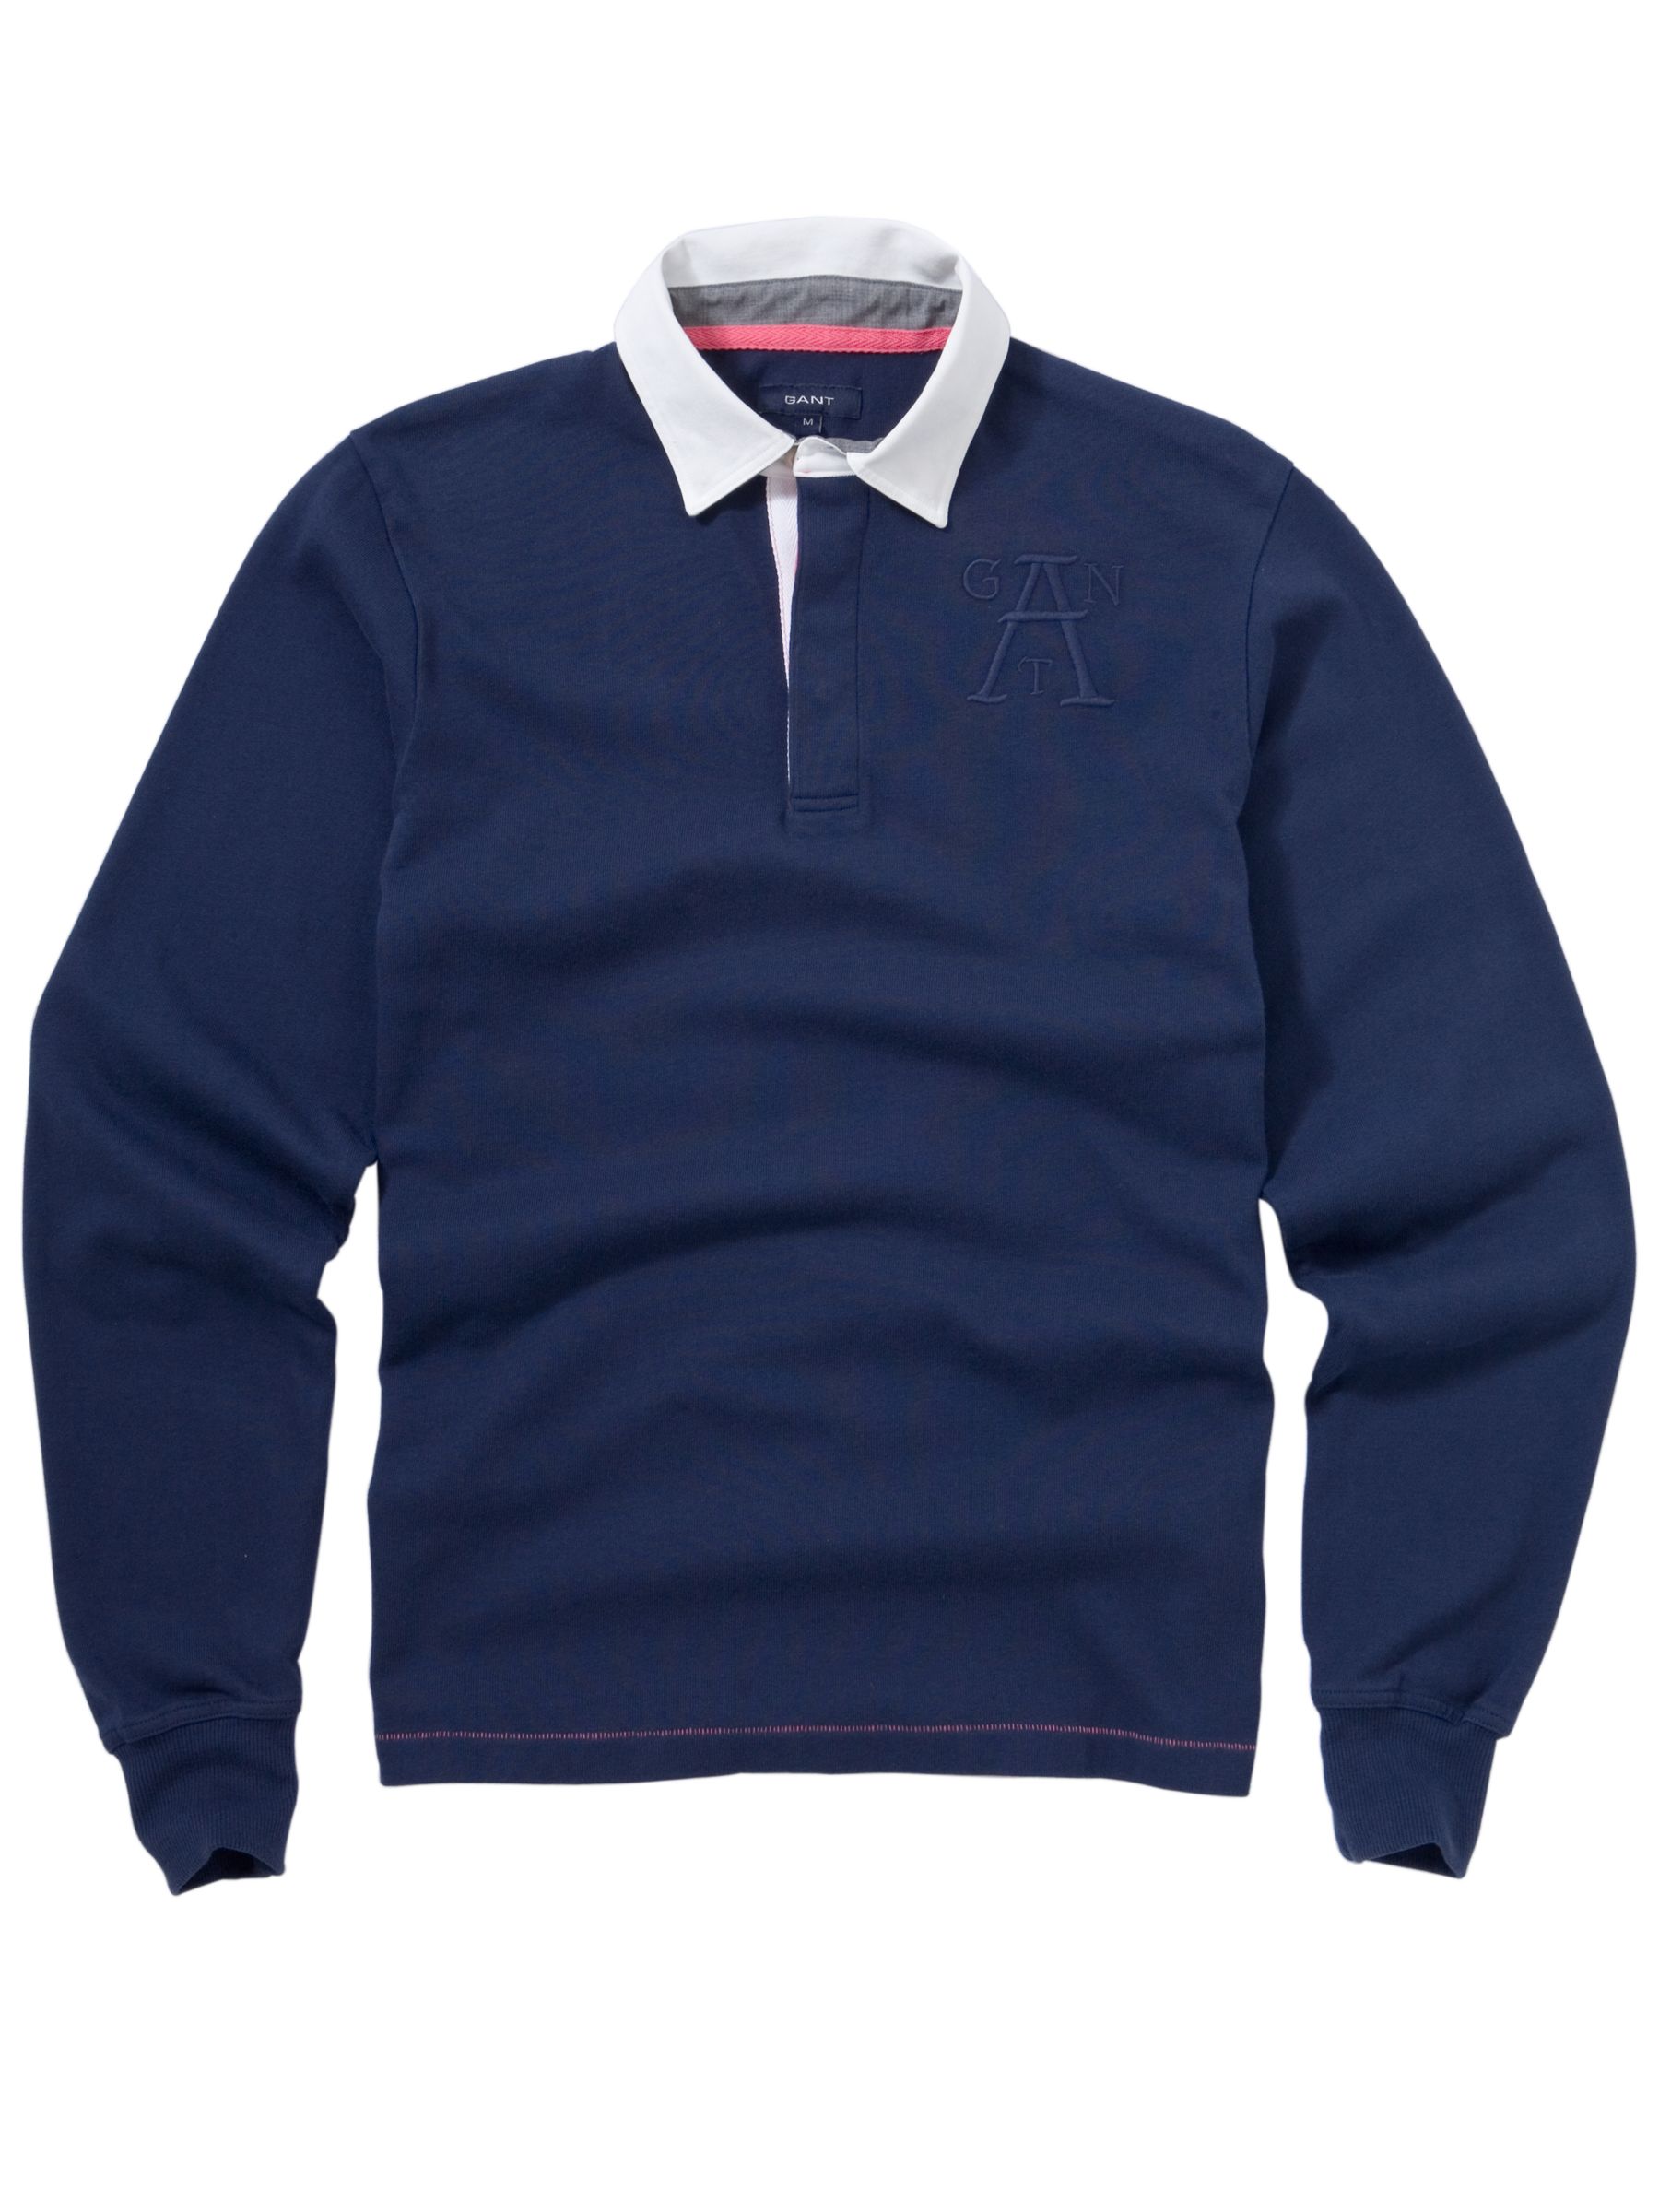 Heavy Rugby Shirt, Navy